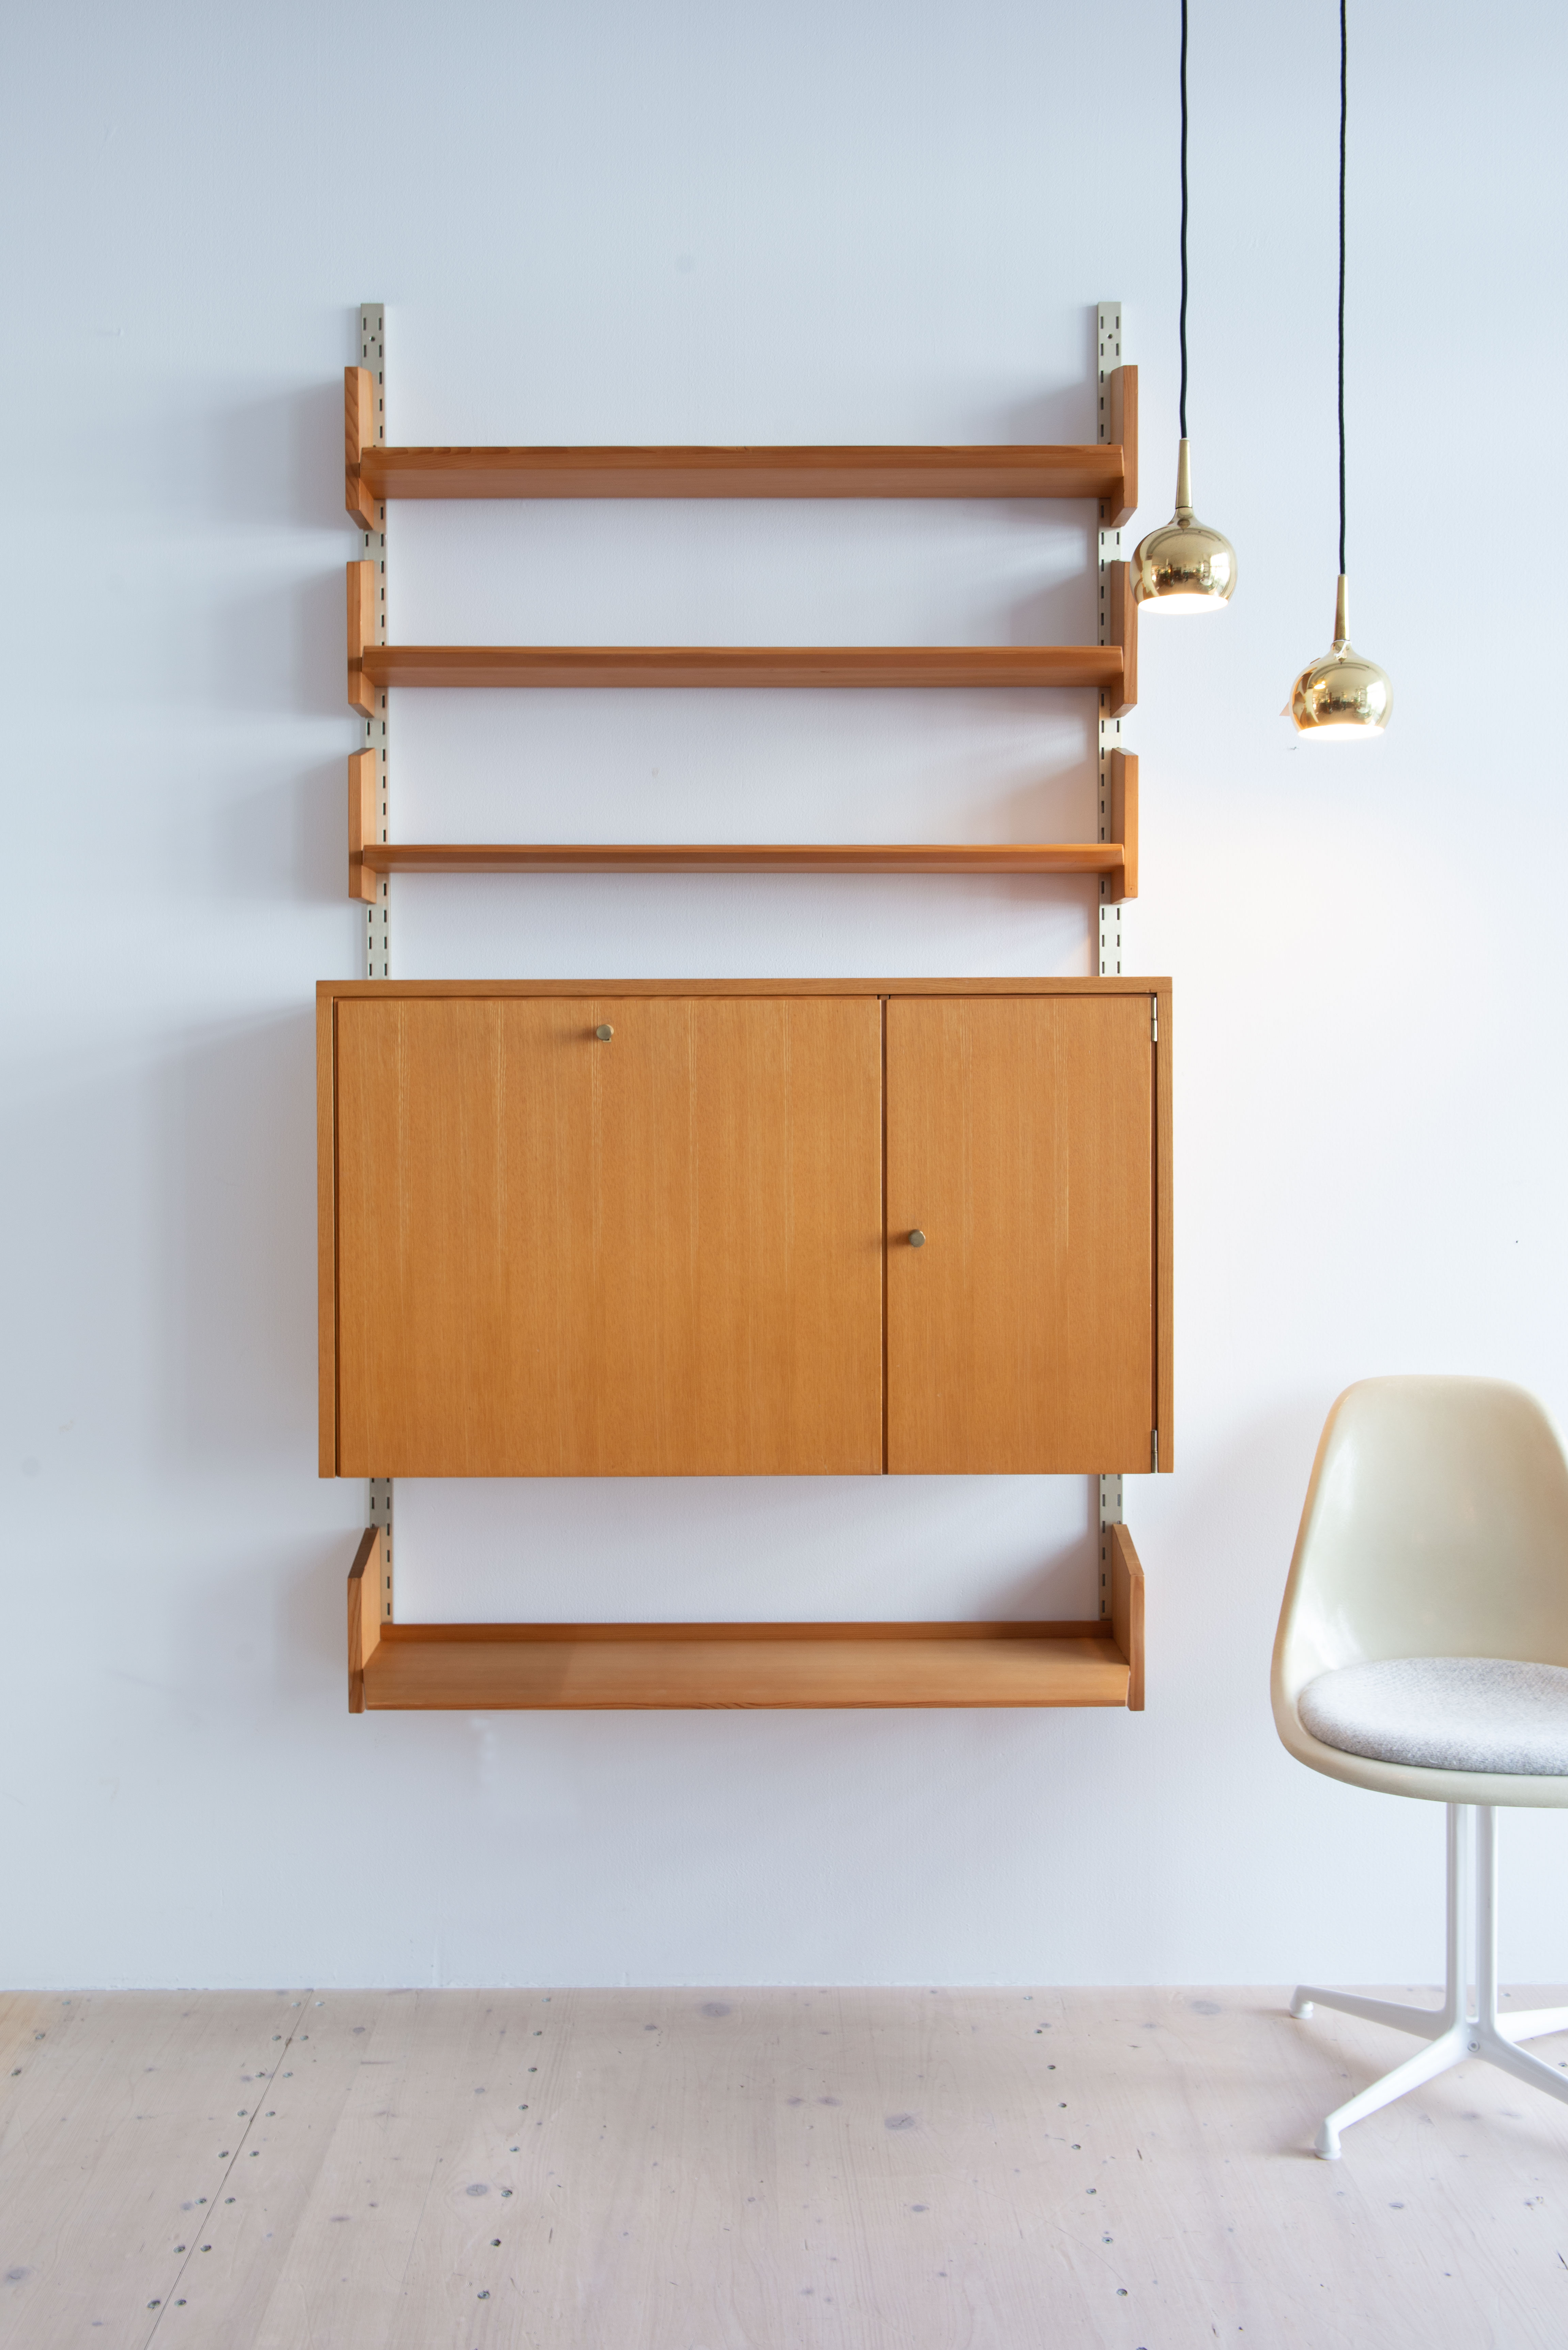 Dieter Reinhold Shelving Unit with Secretary/Desk Function. Produced by WK Möbel in
Germany, 1960s. Available at heyday möbel. Retro Furniture and Other Stuff.